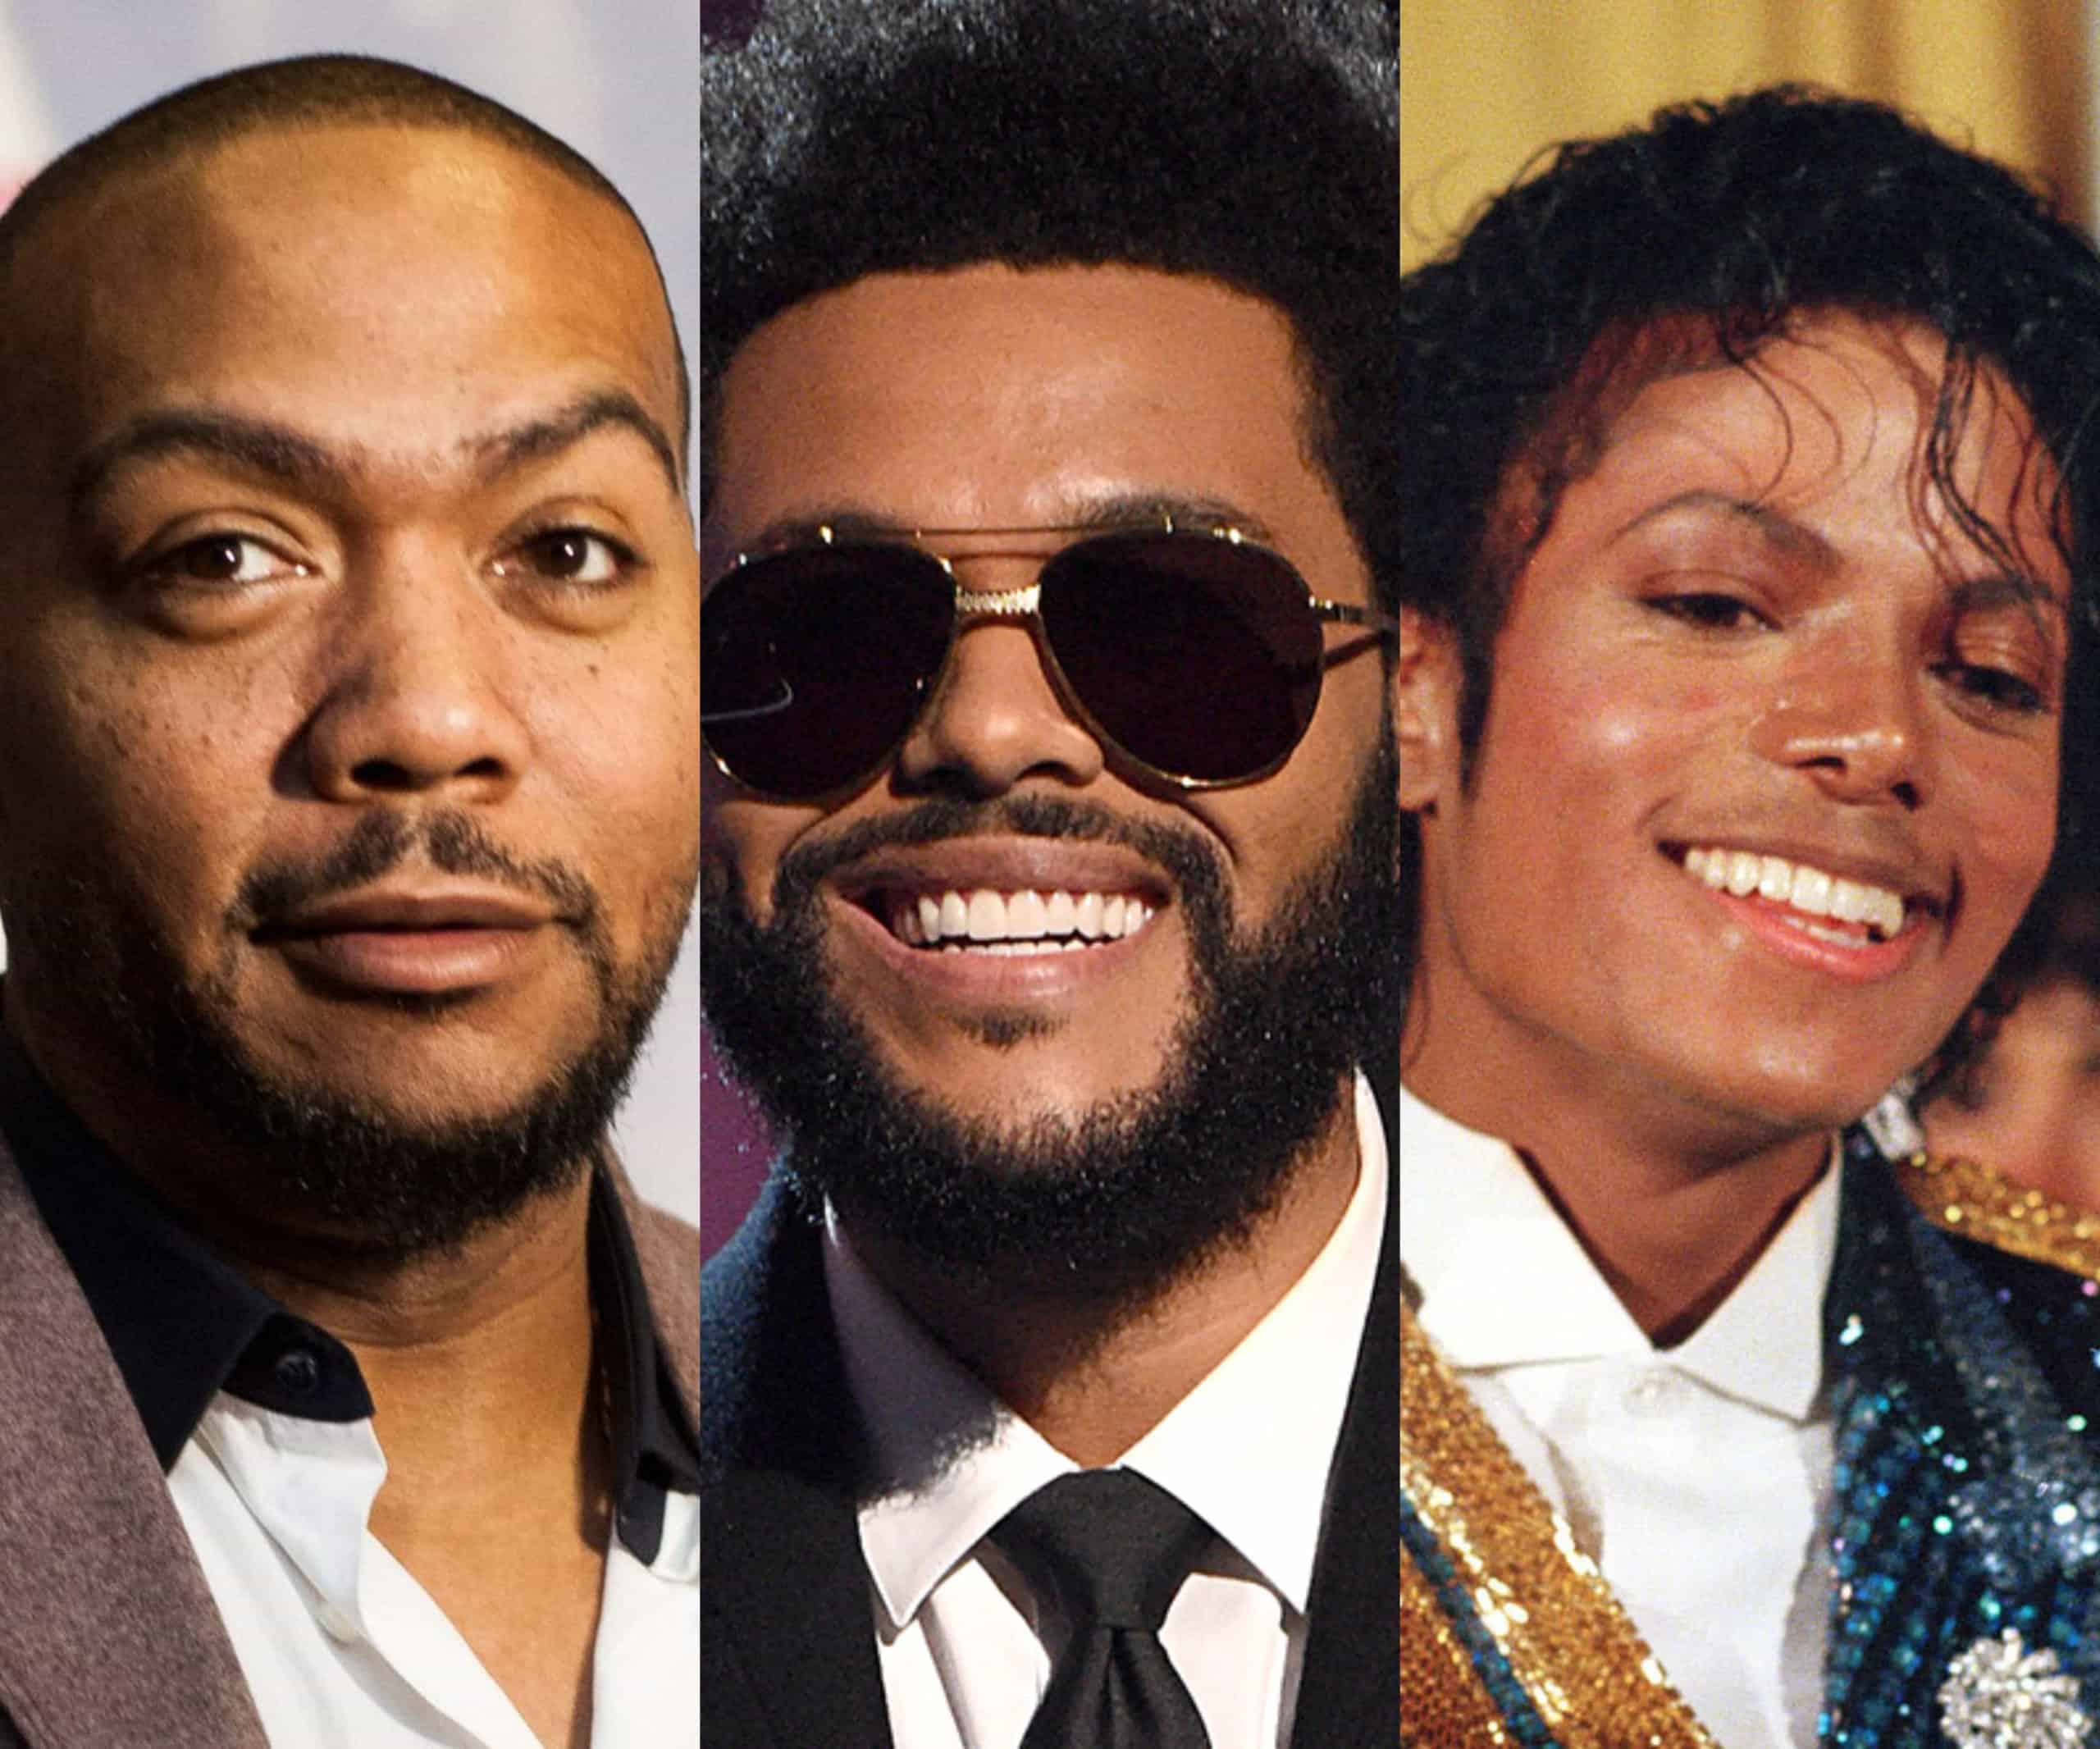 Timbaland Praises The Weeknd's Dawn FM Album With Comparison To MJ's Thriller